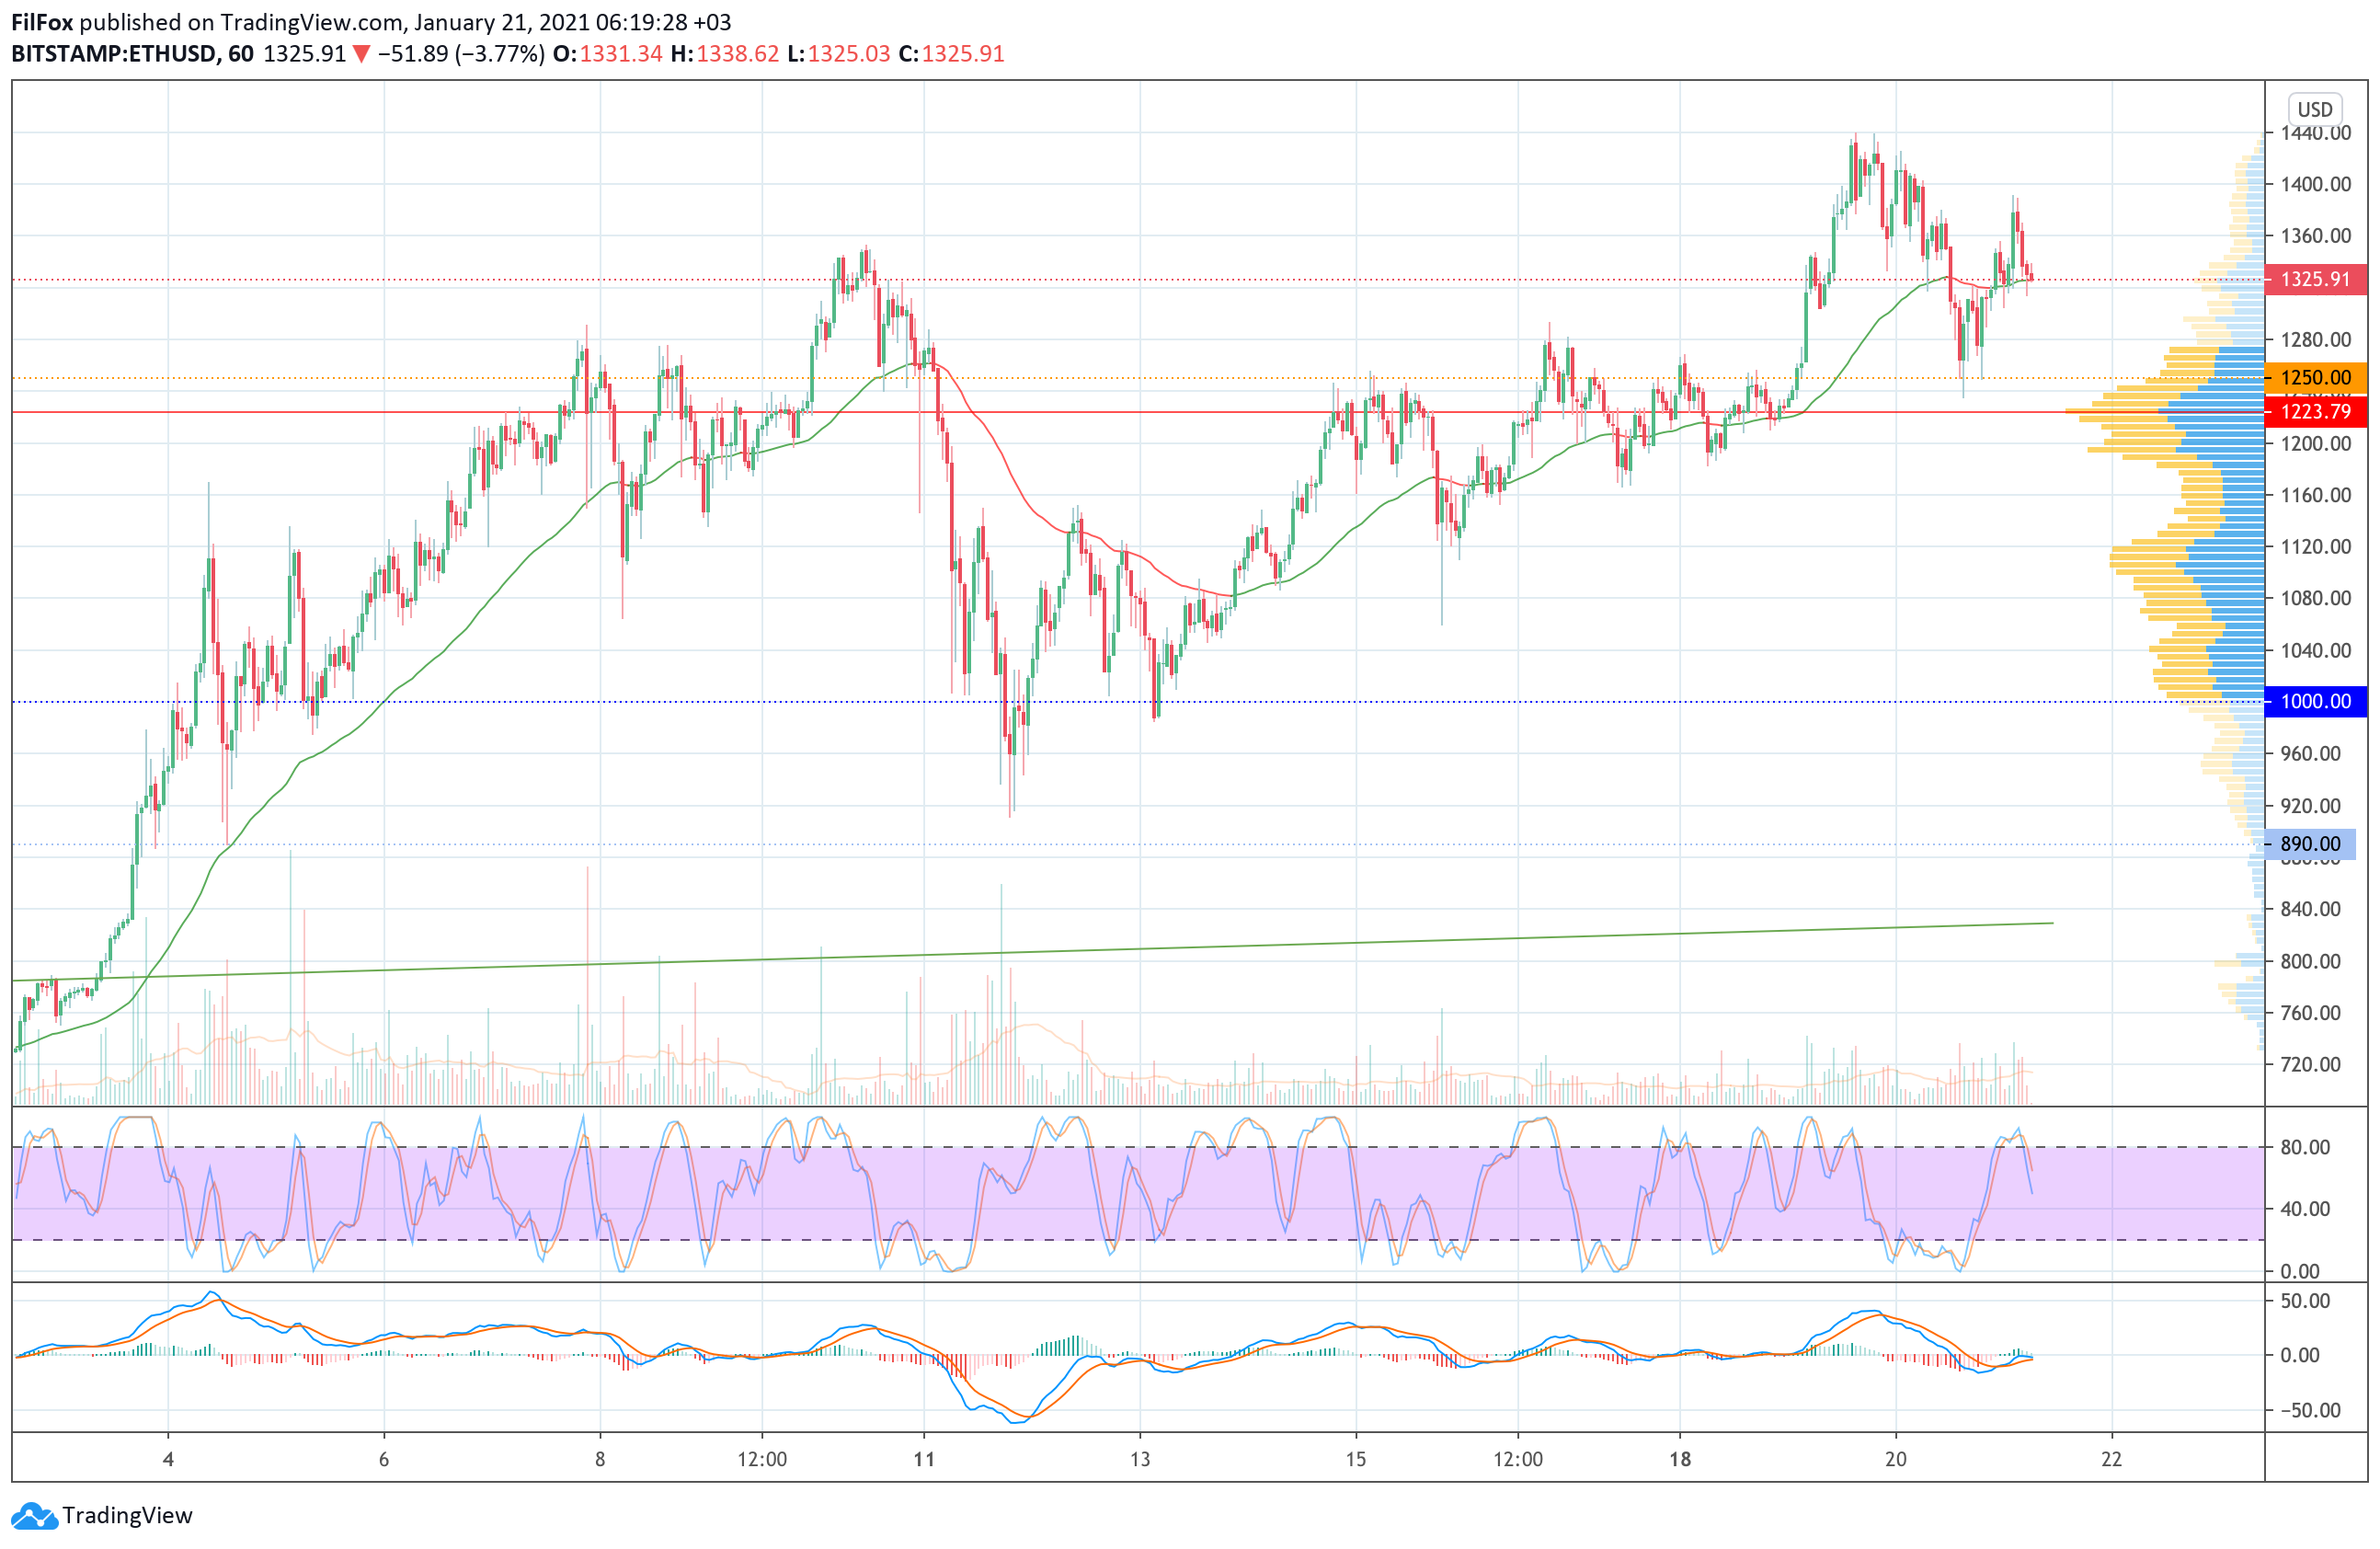 Analysis of prices for Bitcoin, Ethereum, Ripple for 01/21/2021